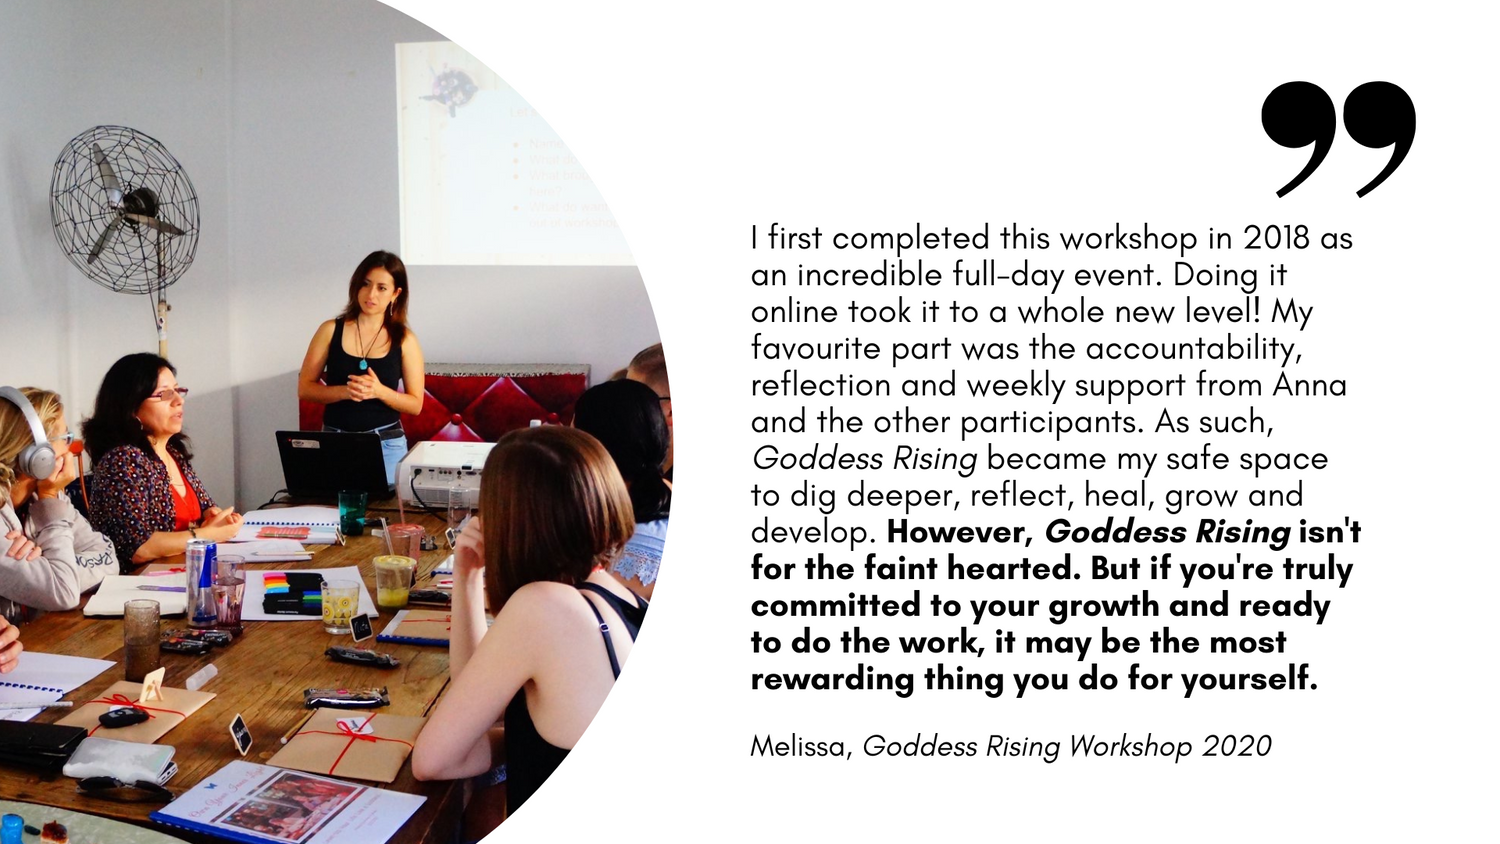 Melissa's review about Anna Krjatian's Goddess Rising Workshop with an image of Anna standing at the head of the table where a group of people sit and listen as one person speaks.